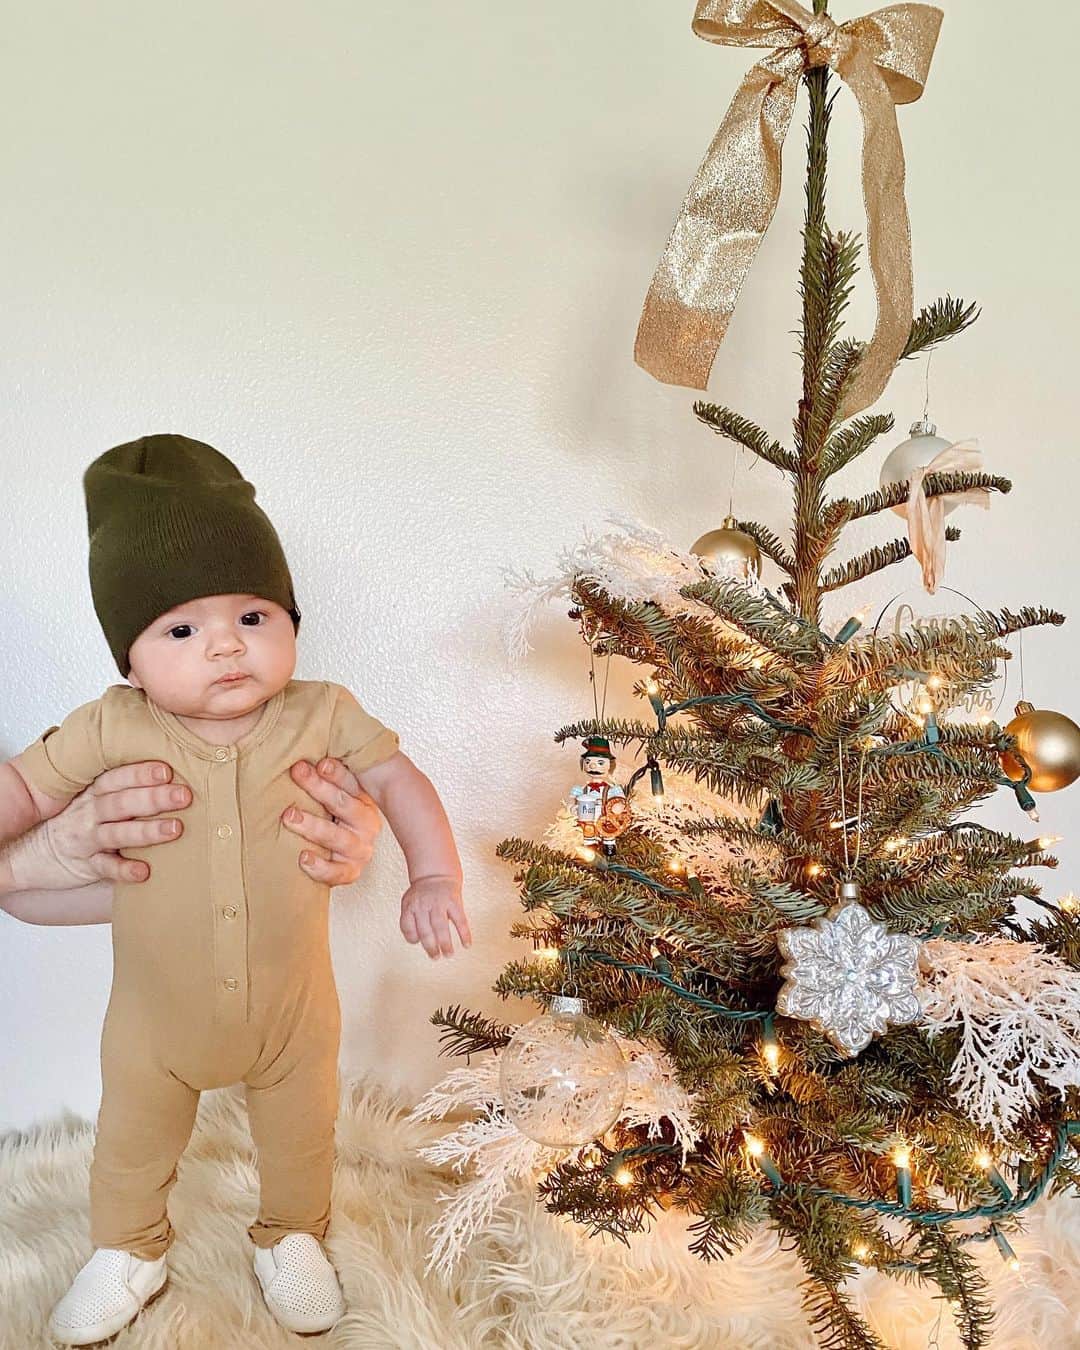 carlyのインスタグラム：「Hands down, the best part of 2019 was creating him 🤗 I’ve been going through my photos to share my favorite moments of this year and I realized I was pregnant for nearly all of it 😂 the whole year led to him! And it was SO worth it 🥰 #babysfirstchristmas」